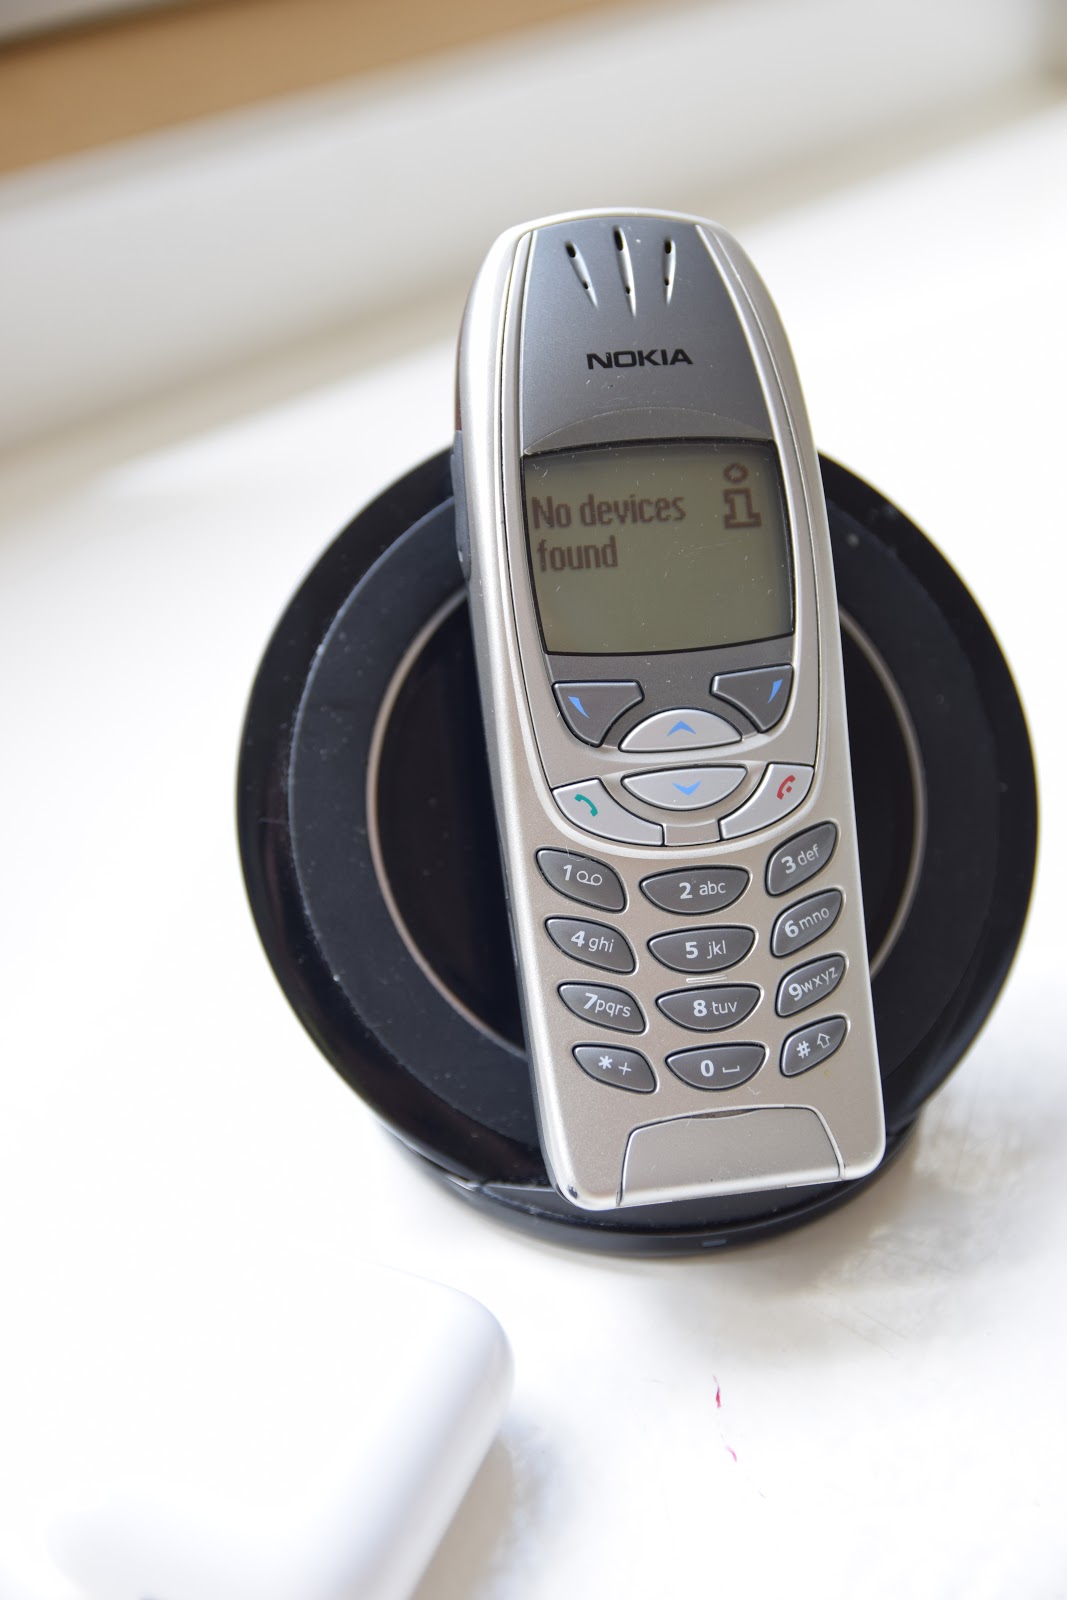 Conclusion Notorious I'm thirsty Vintage Gadget Collector: Nokia 6310i